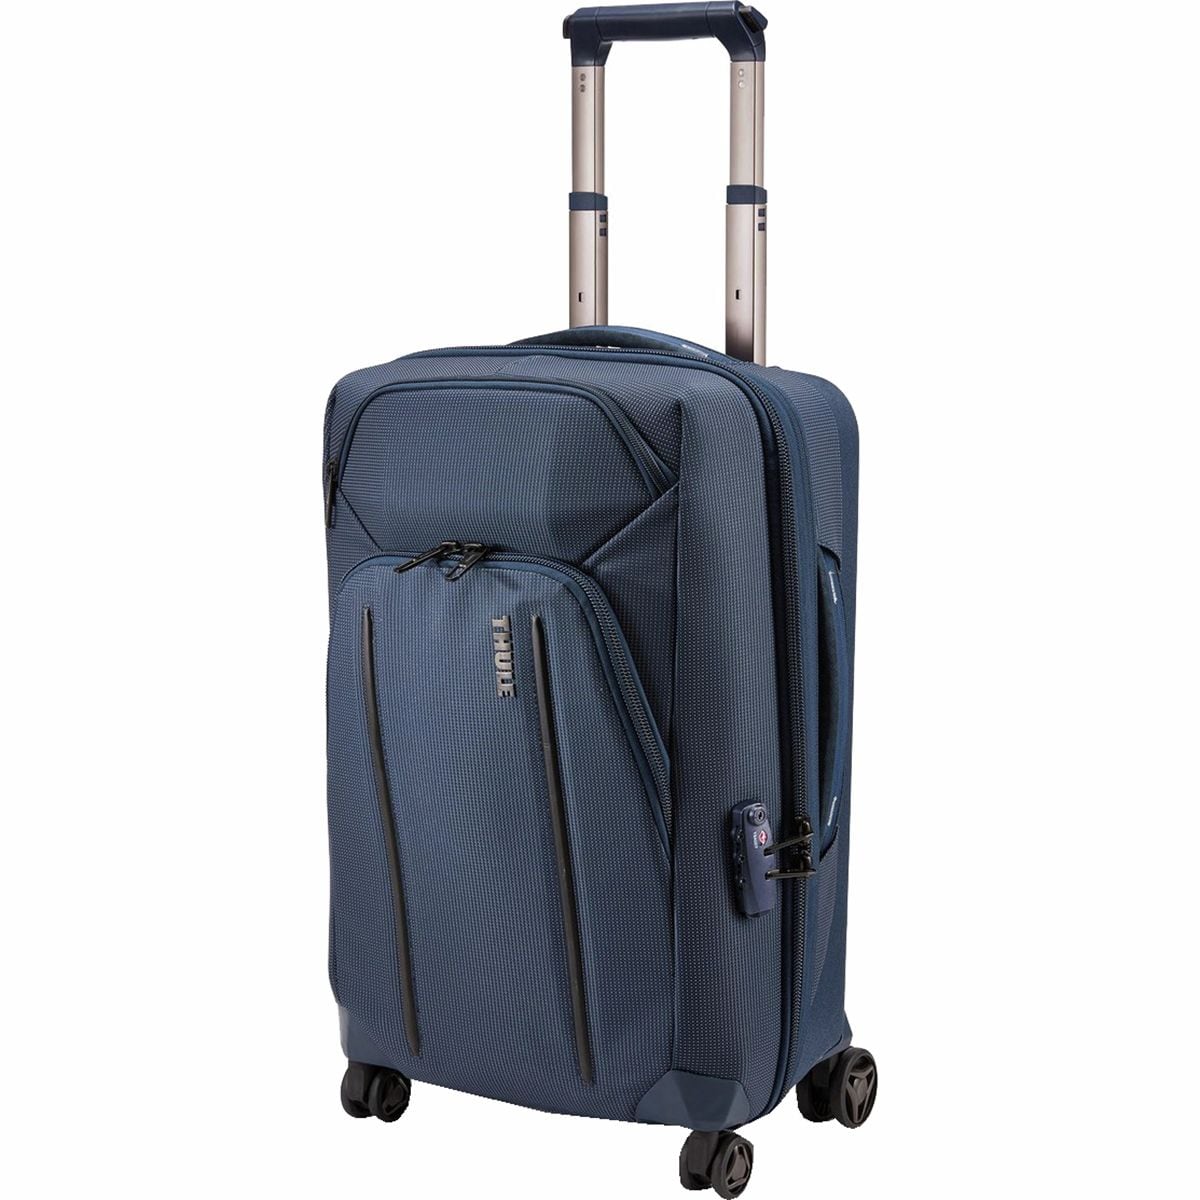 Crossover 2 35L Carry-On Spinner Bag